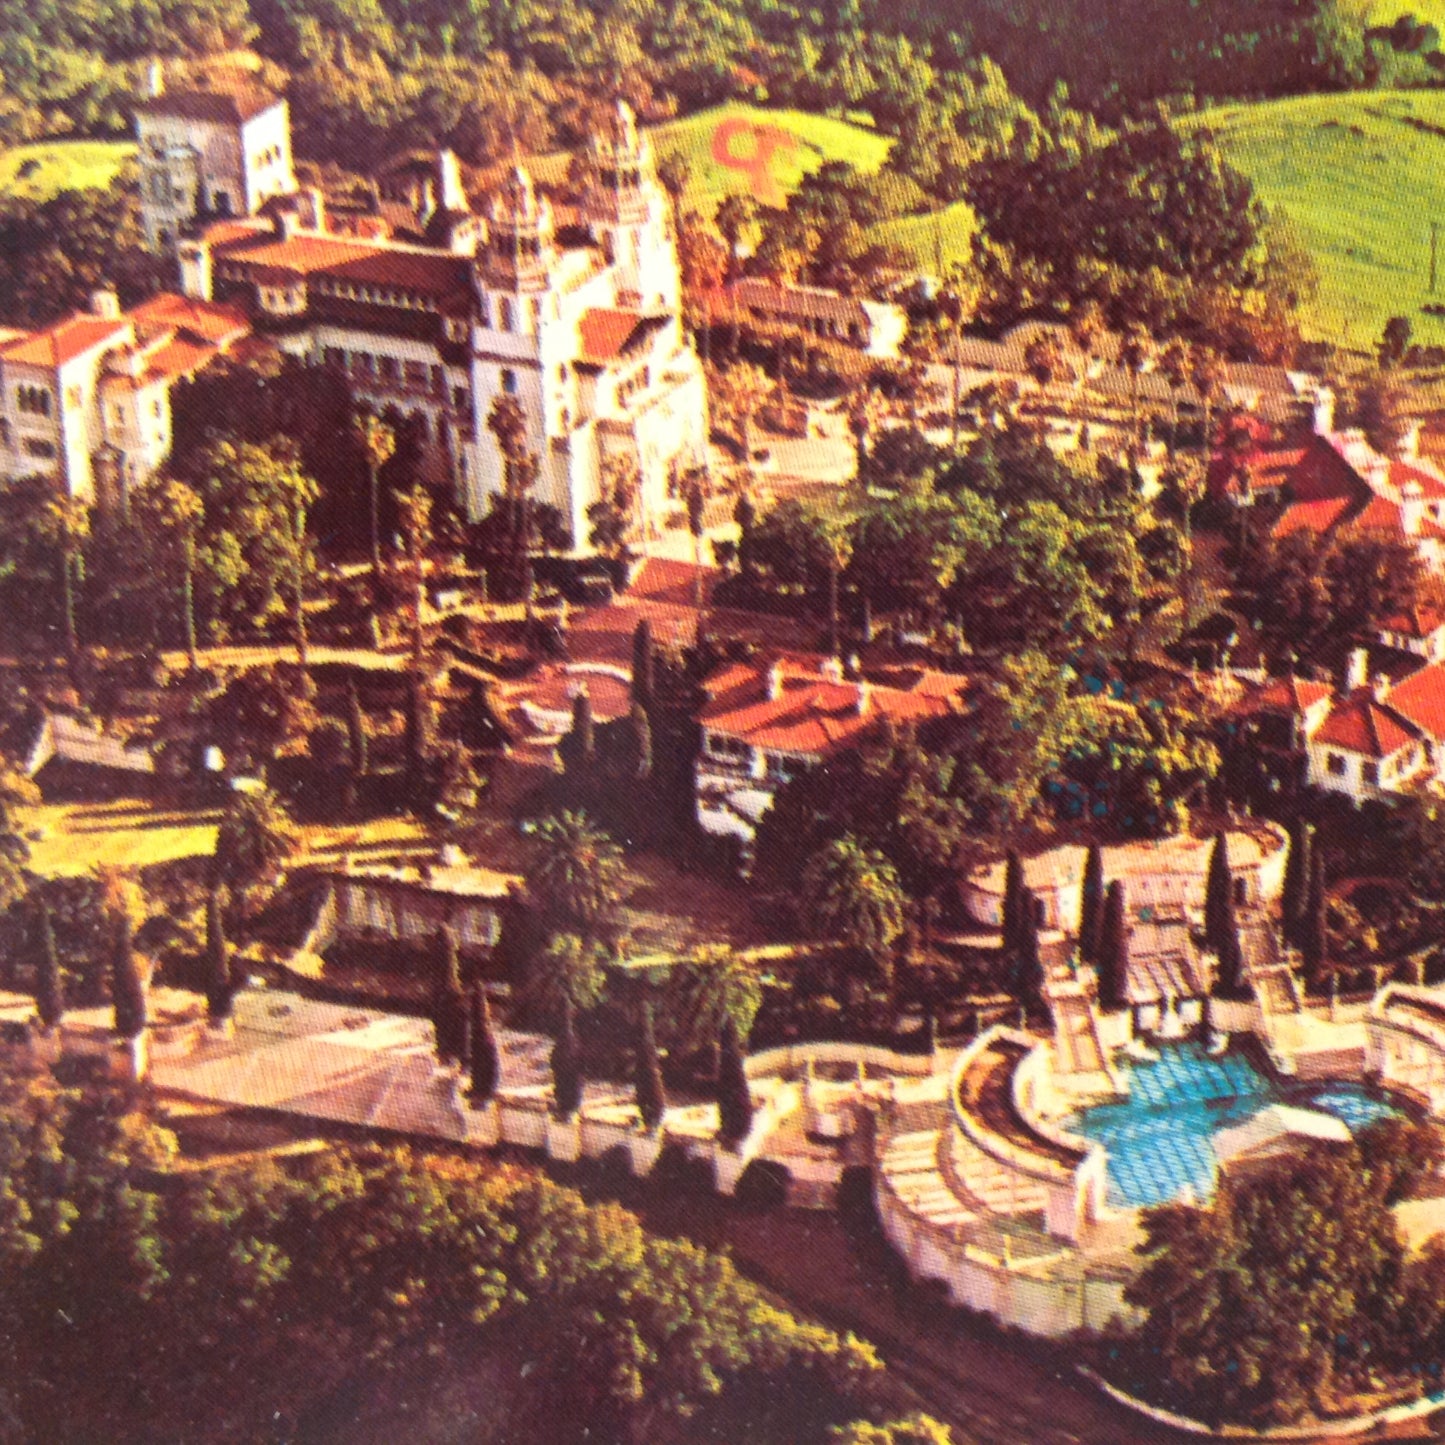 Vintage 1977 Plastichrome by Colourpicture Aerial View of Hearst Castle and Grounds Southern California America's Scenic Wonderland